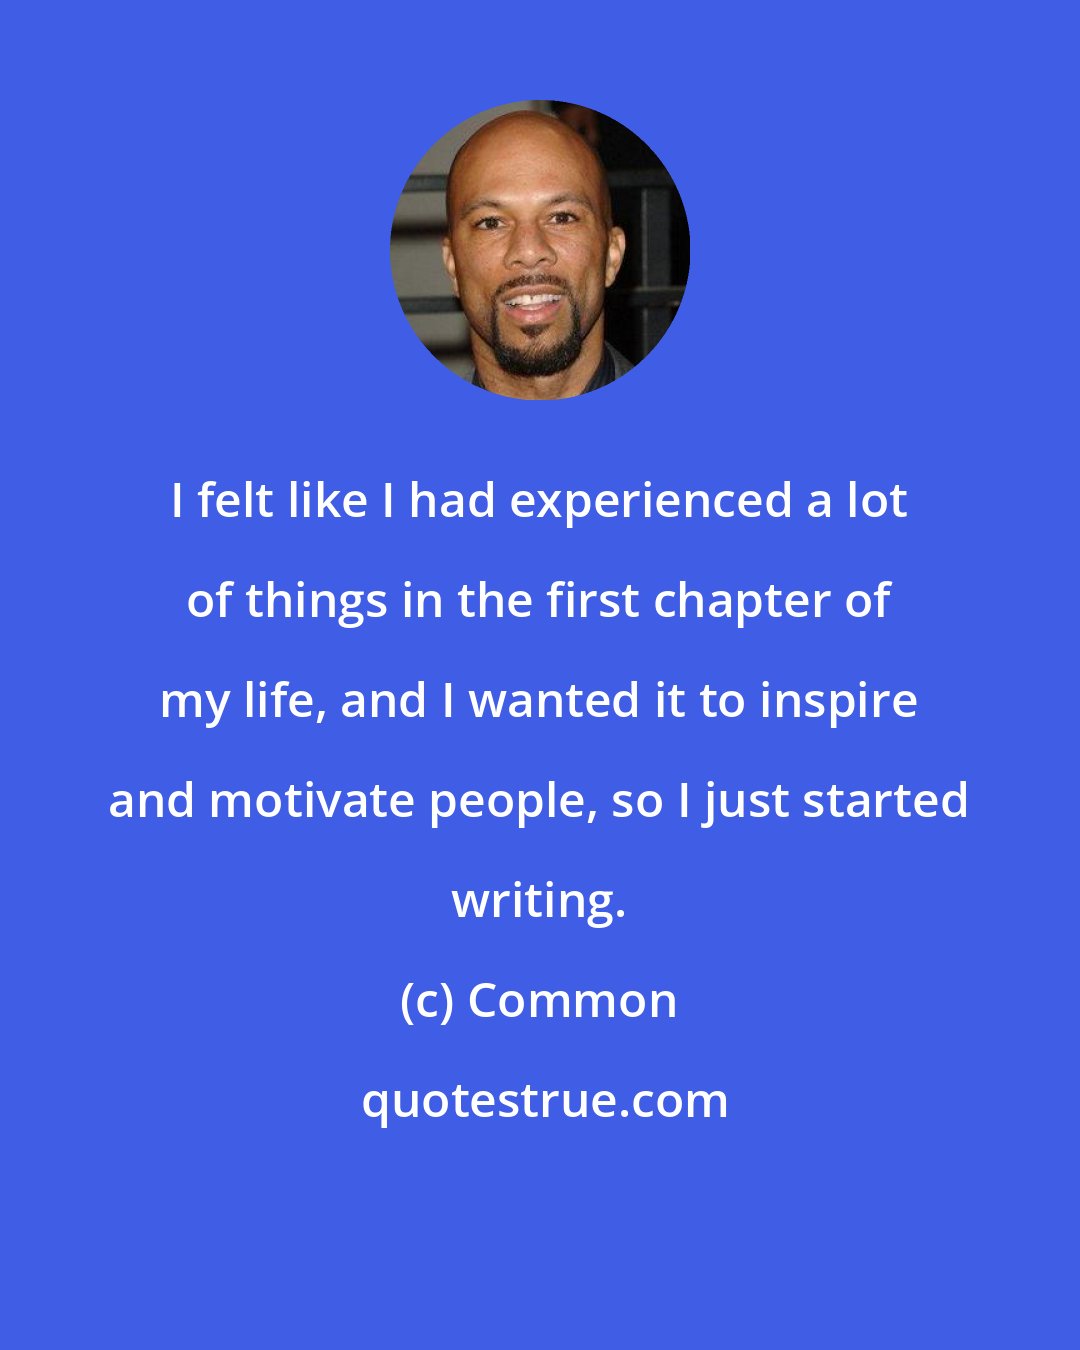 Common: I felt like I had experienced a lot of things in the first chapter of my life, and I wanted it to inspire and motivate people, so I just started writing.